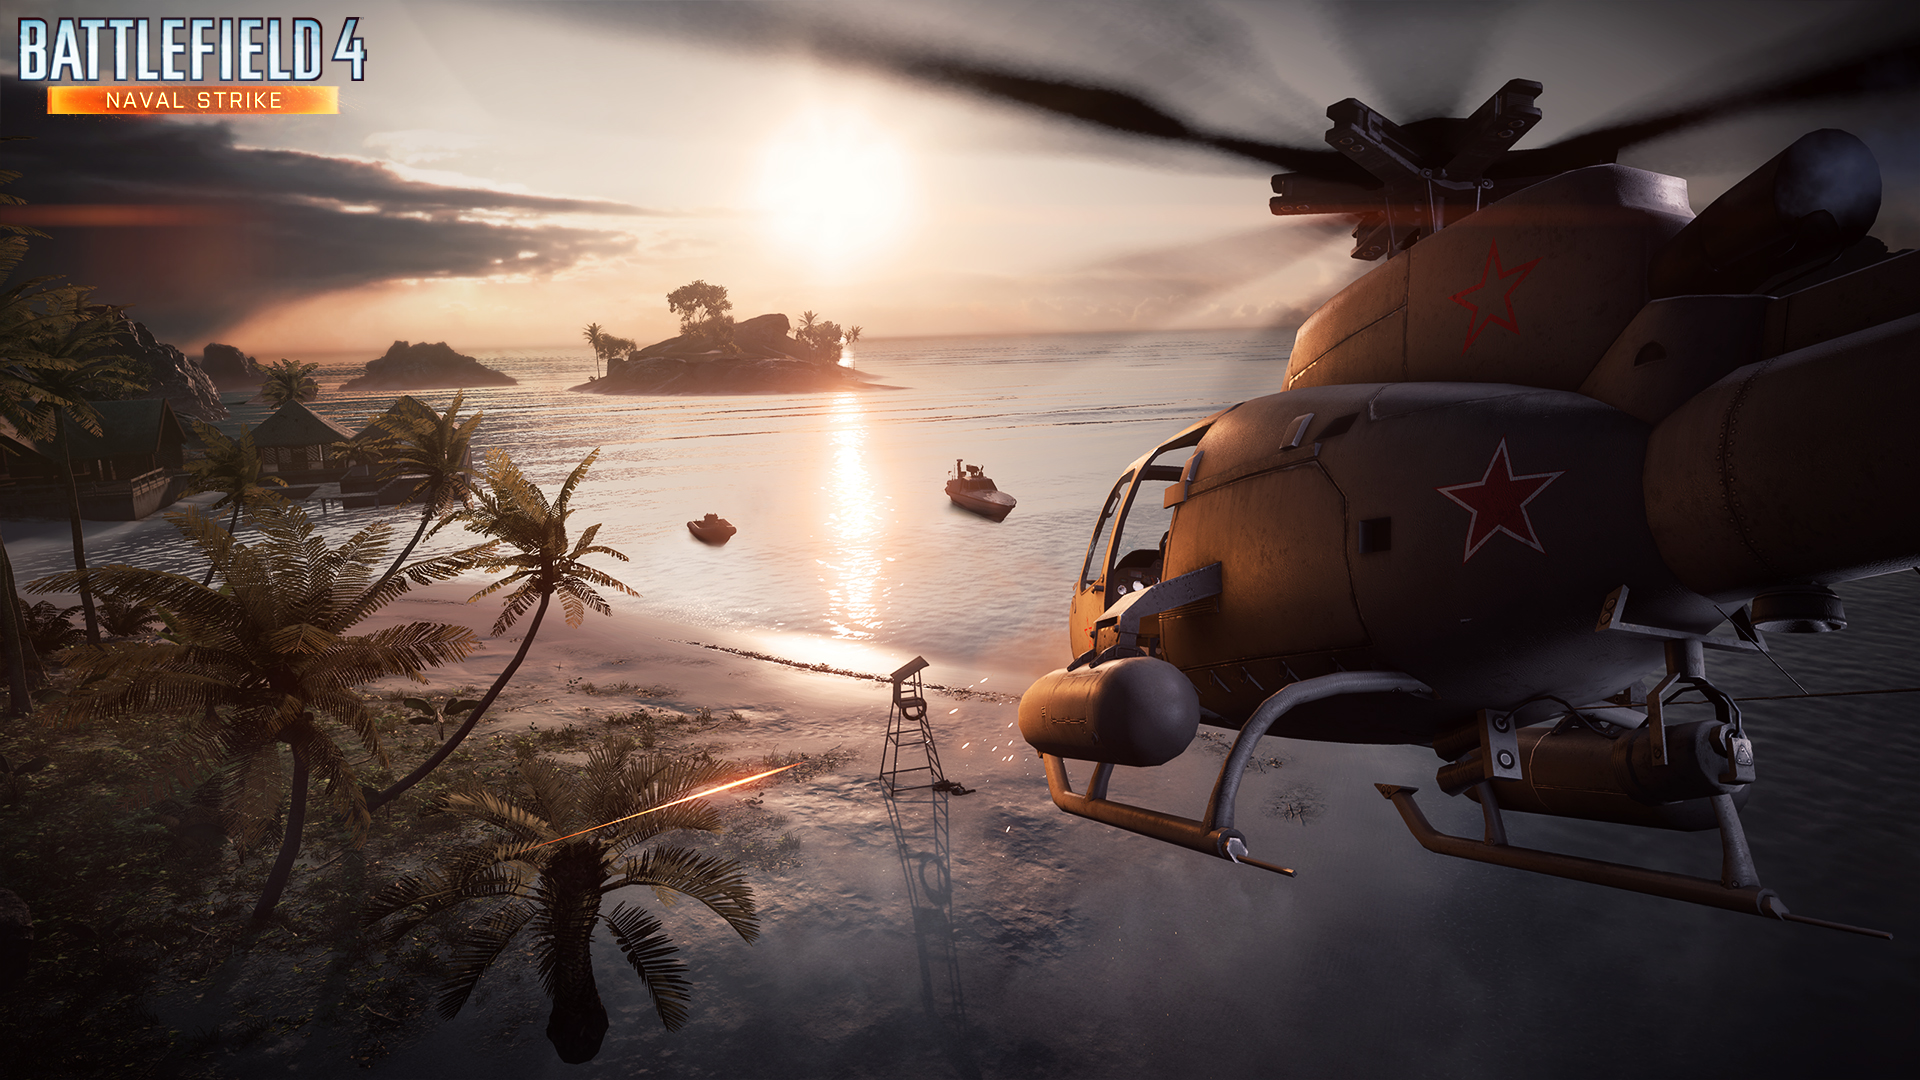 Battlefield 4 PS4 and PS3 Game Updates Incoming, Patch Notes - MP1st